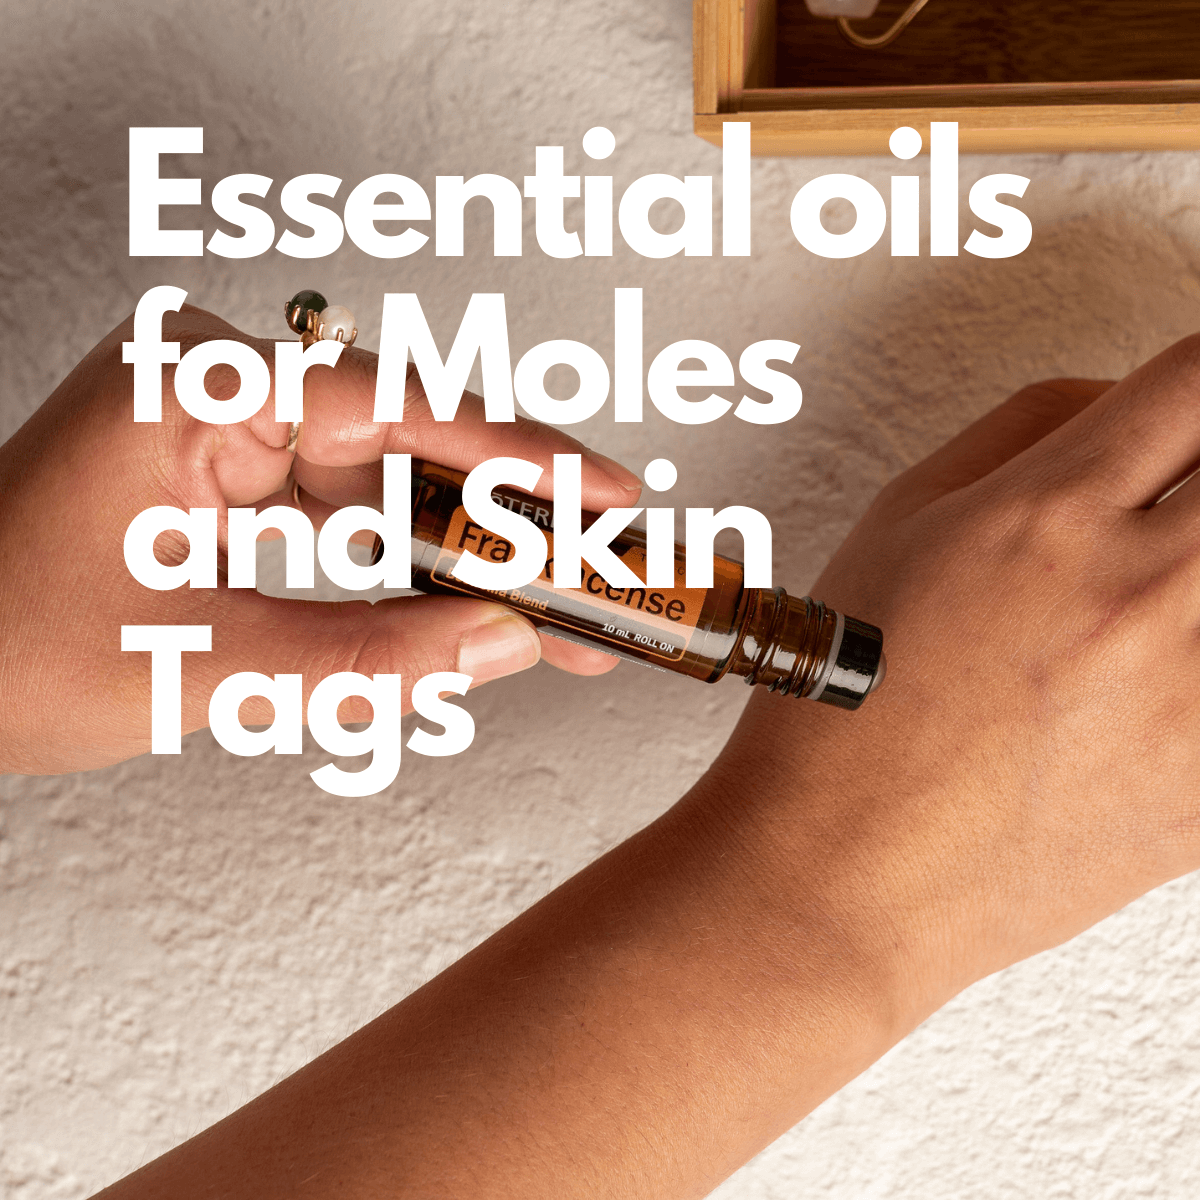 Remove Skin Tags Naturally with Essential Oils 